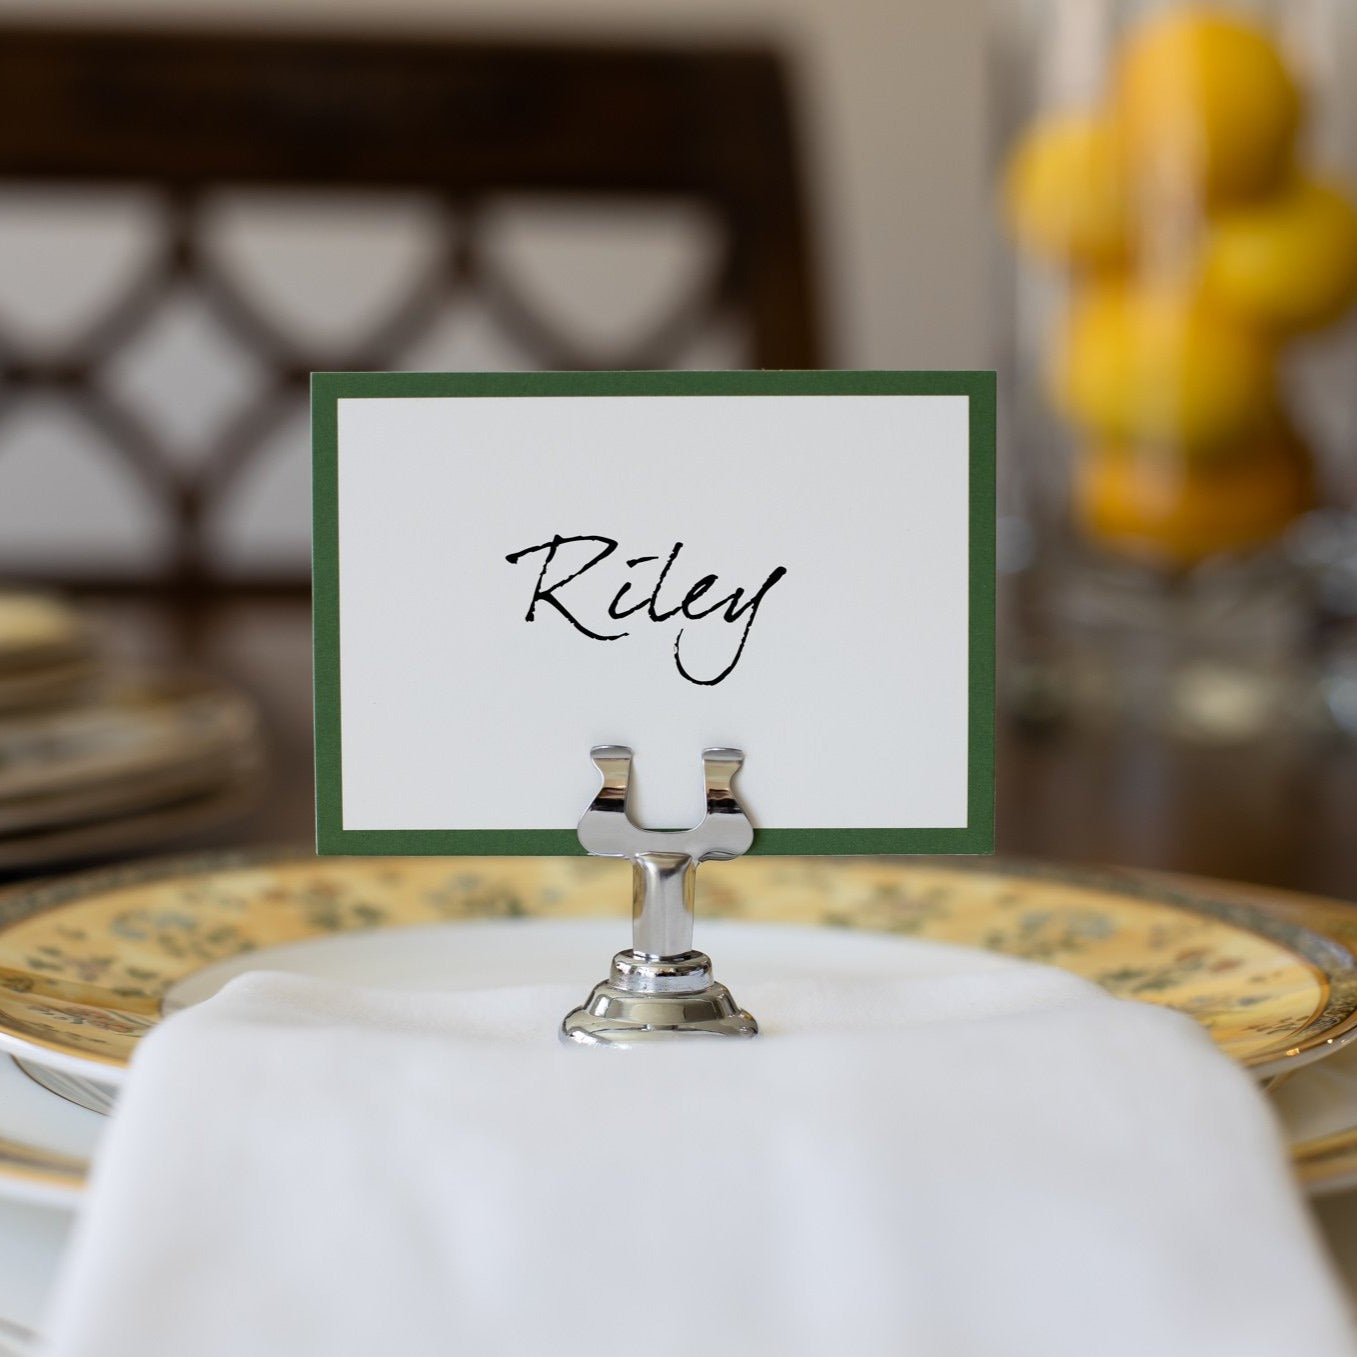 another example of the place holding a place card with a name written on it